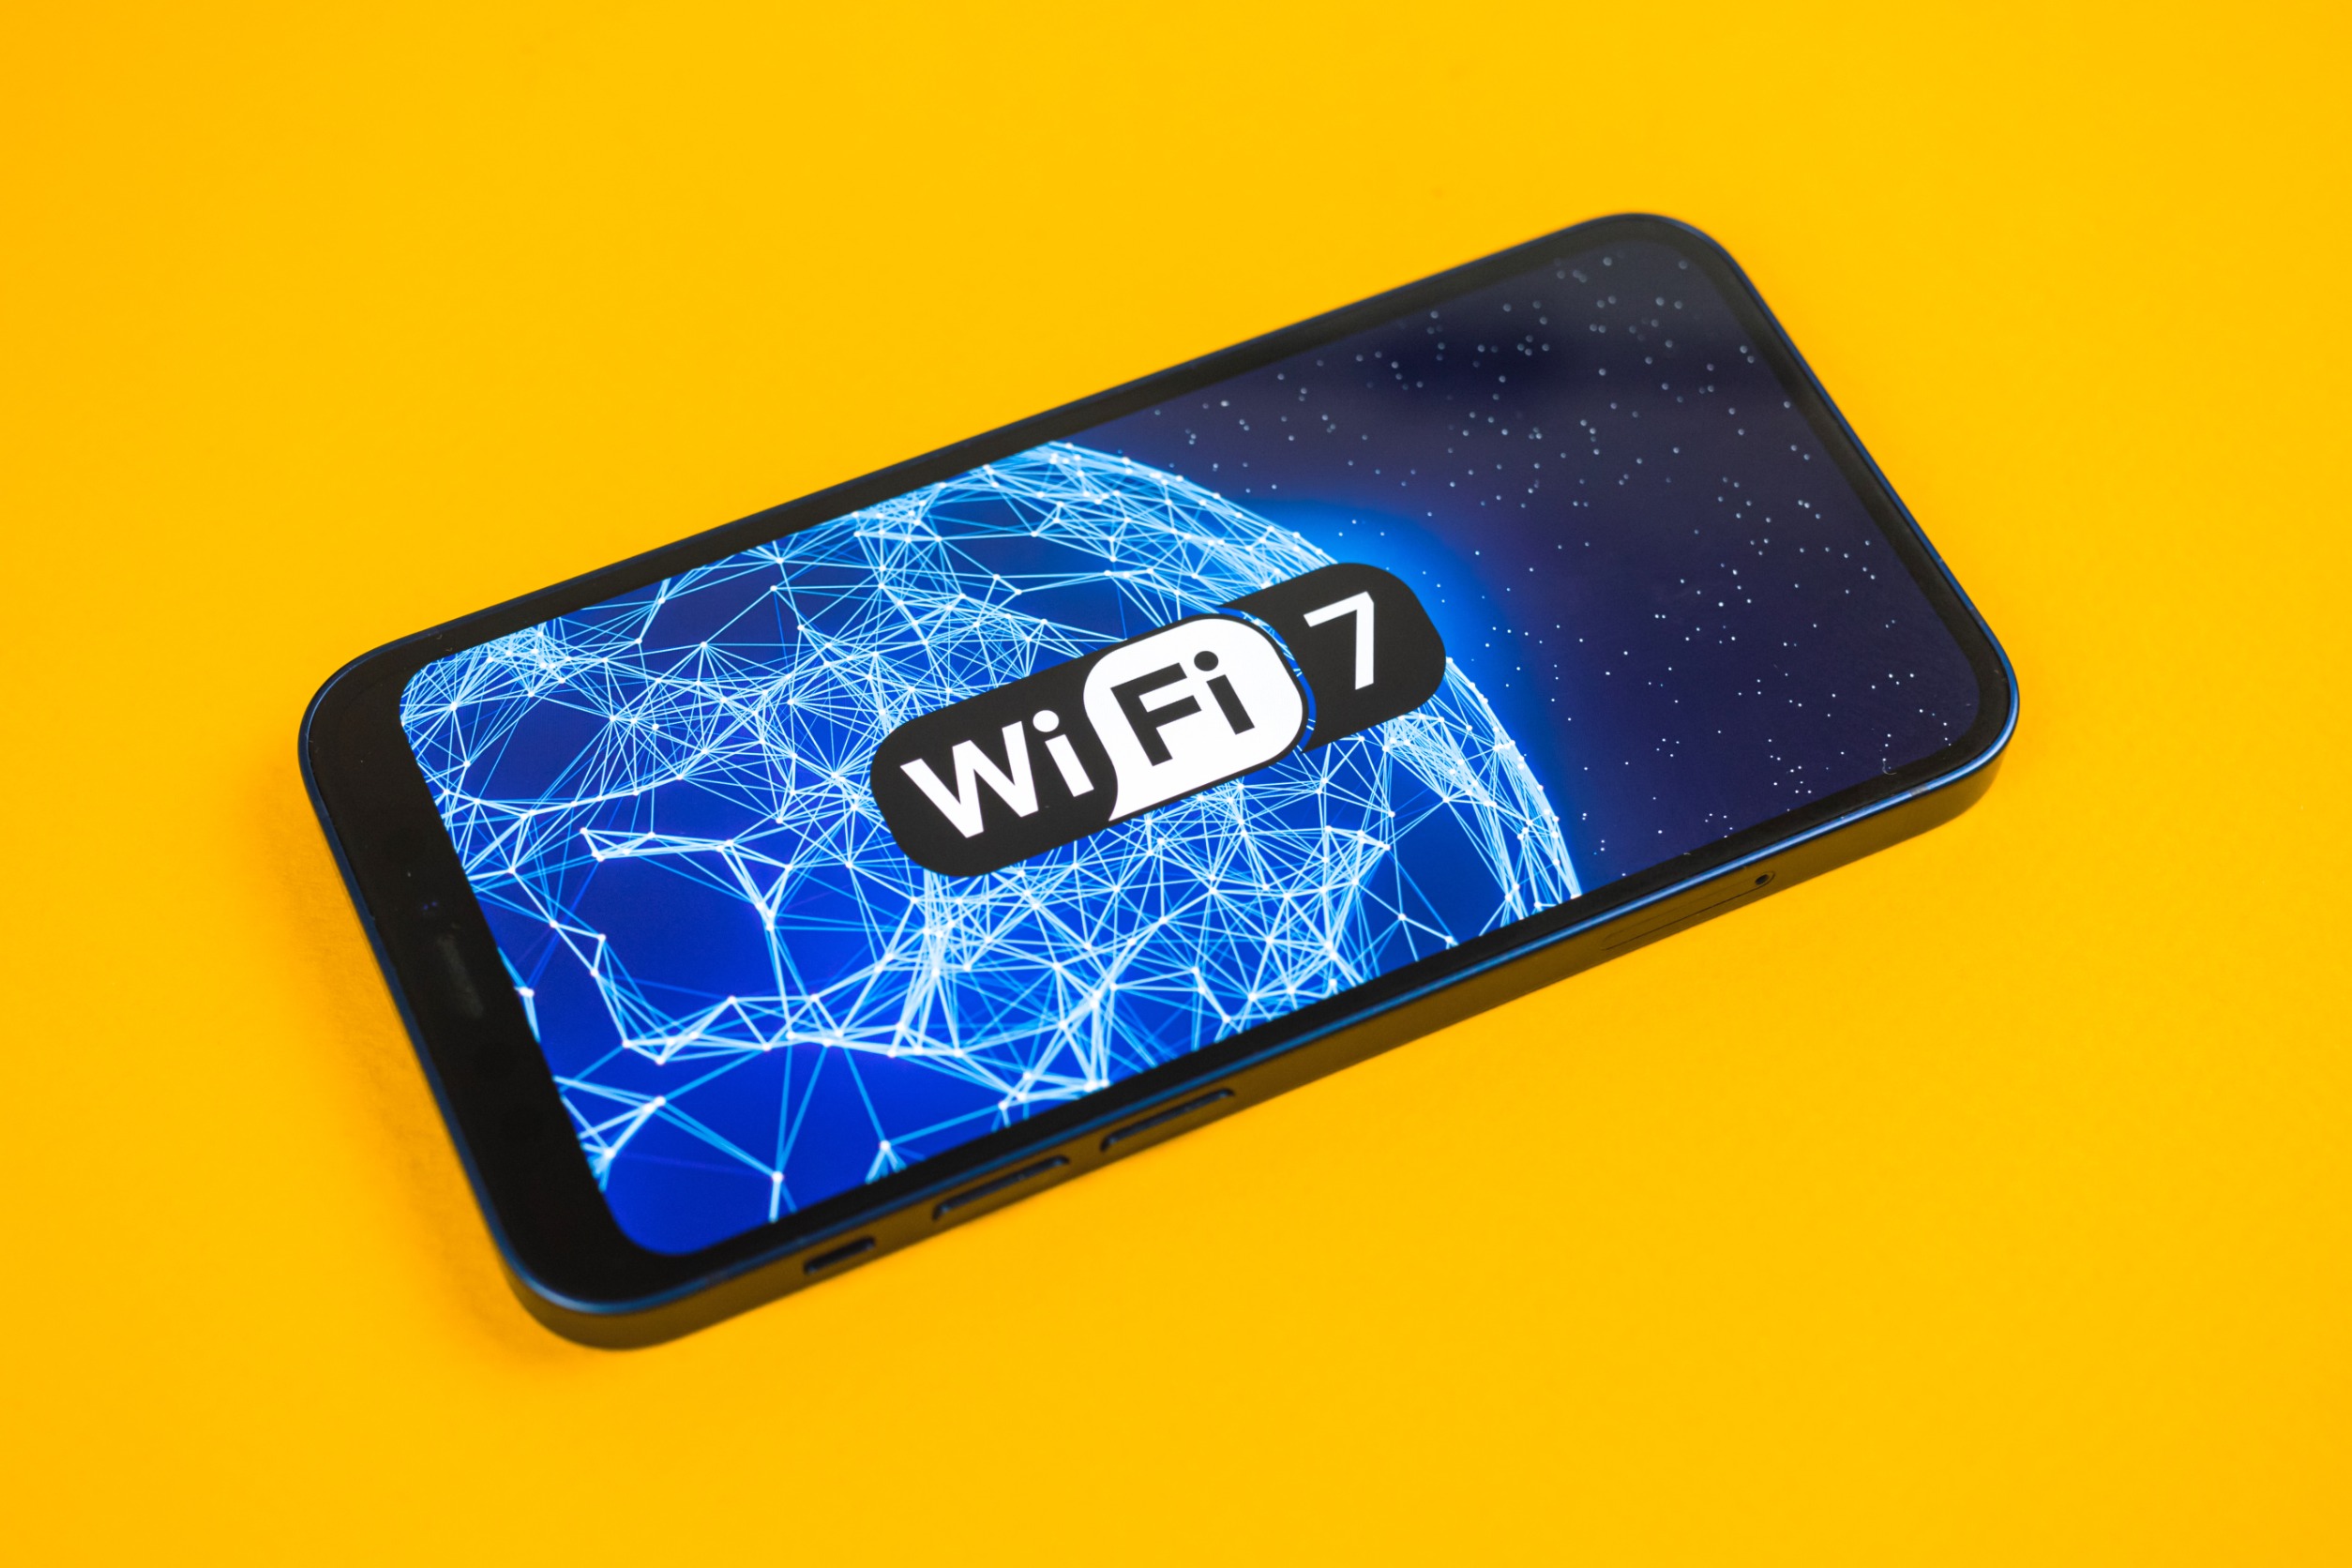 All You Need To Know, What is WiFi 7? When is WiFi 7 Coming Out?